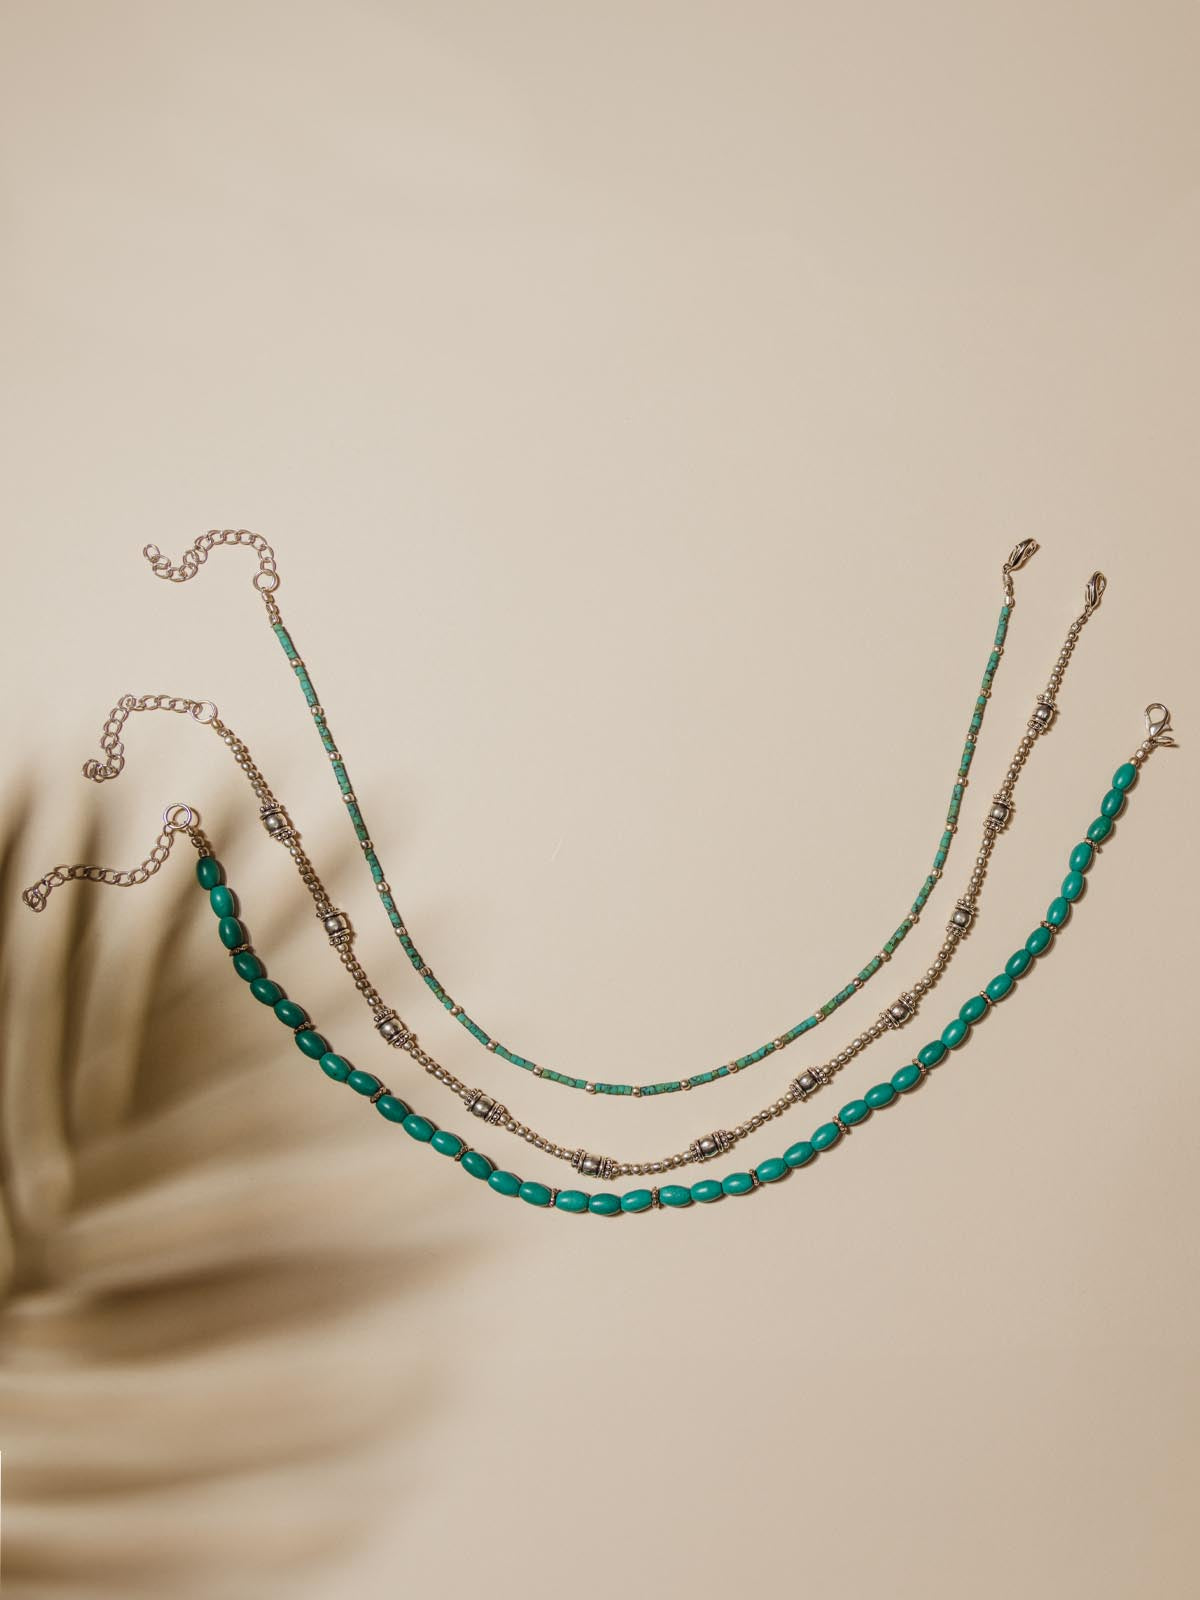 Set of 3 Turquoise and Joffa – Silver Joffa Necklaces | Marketplace Layering